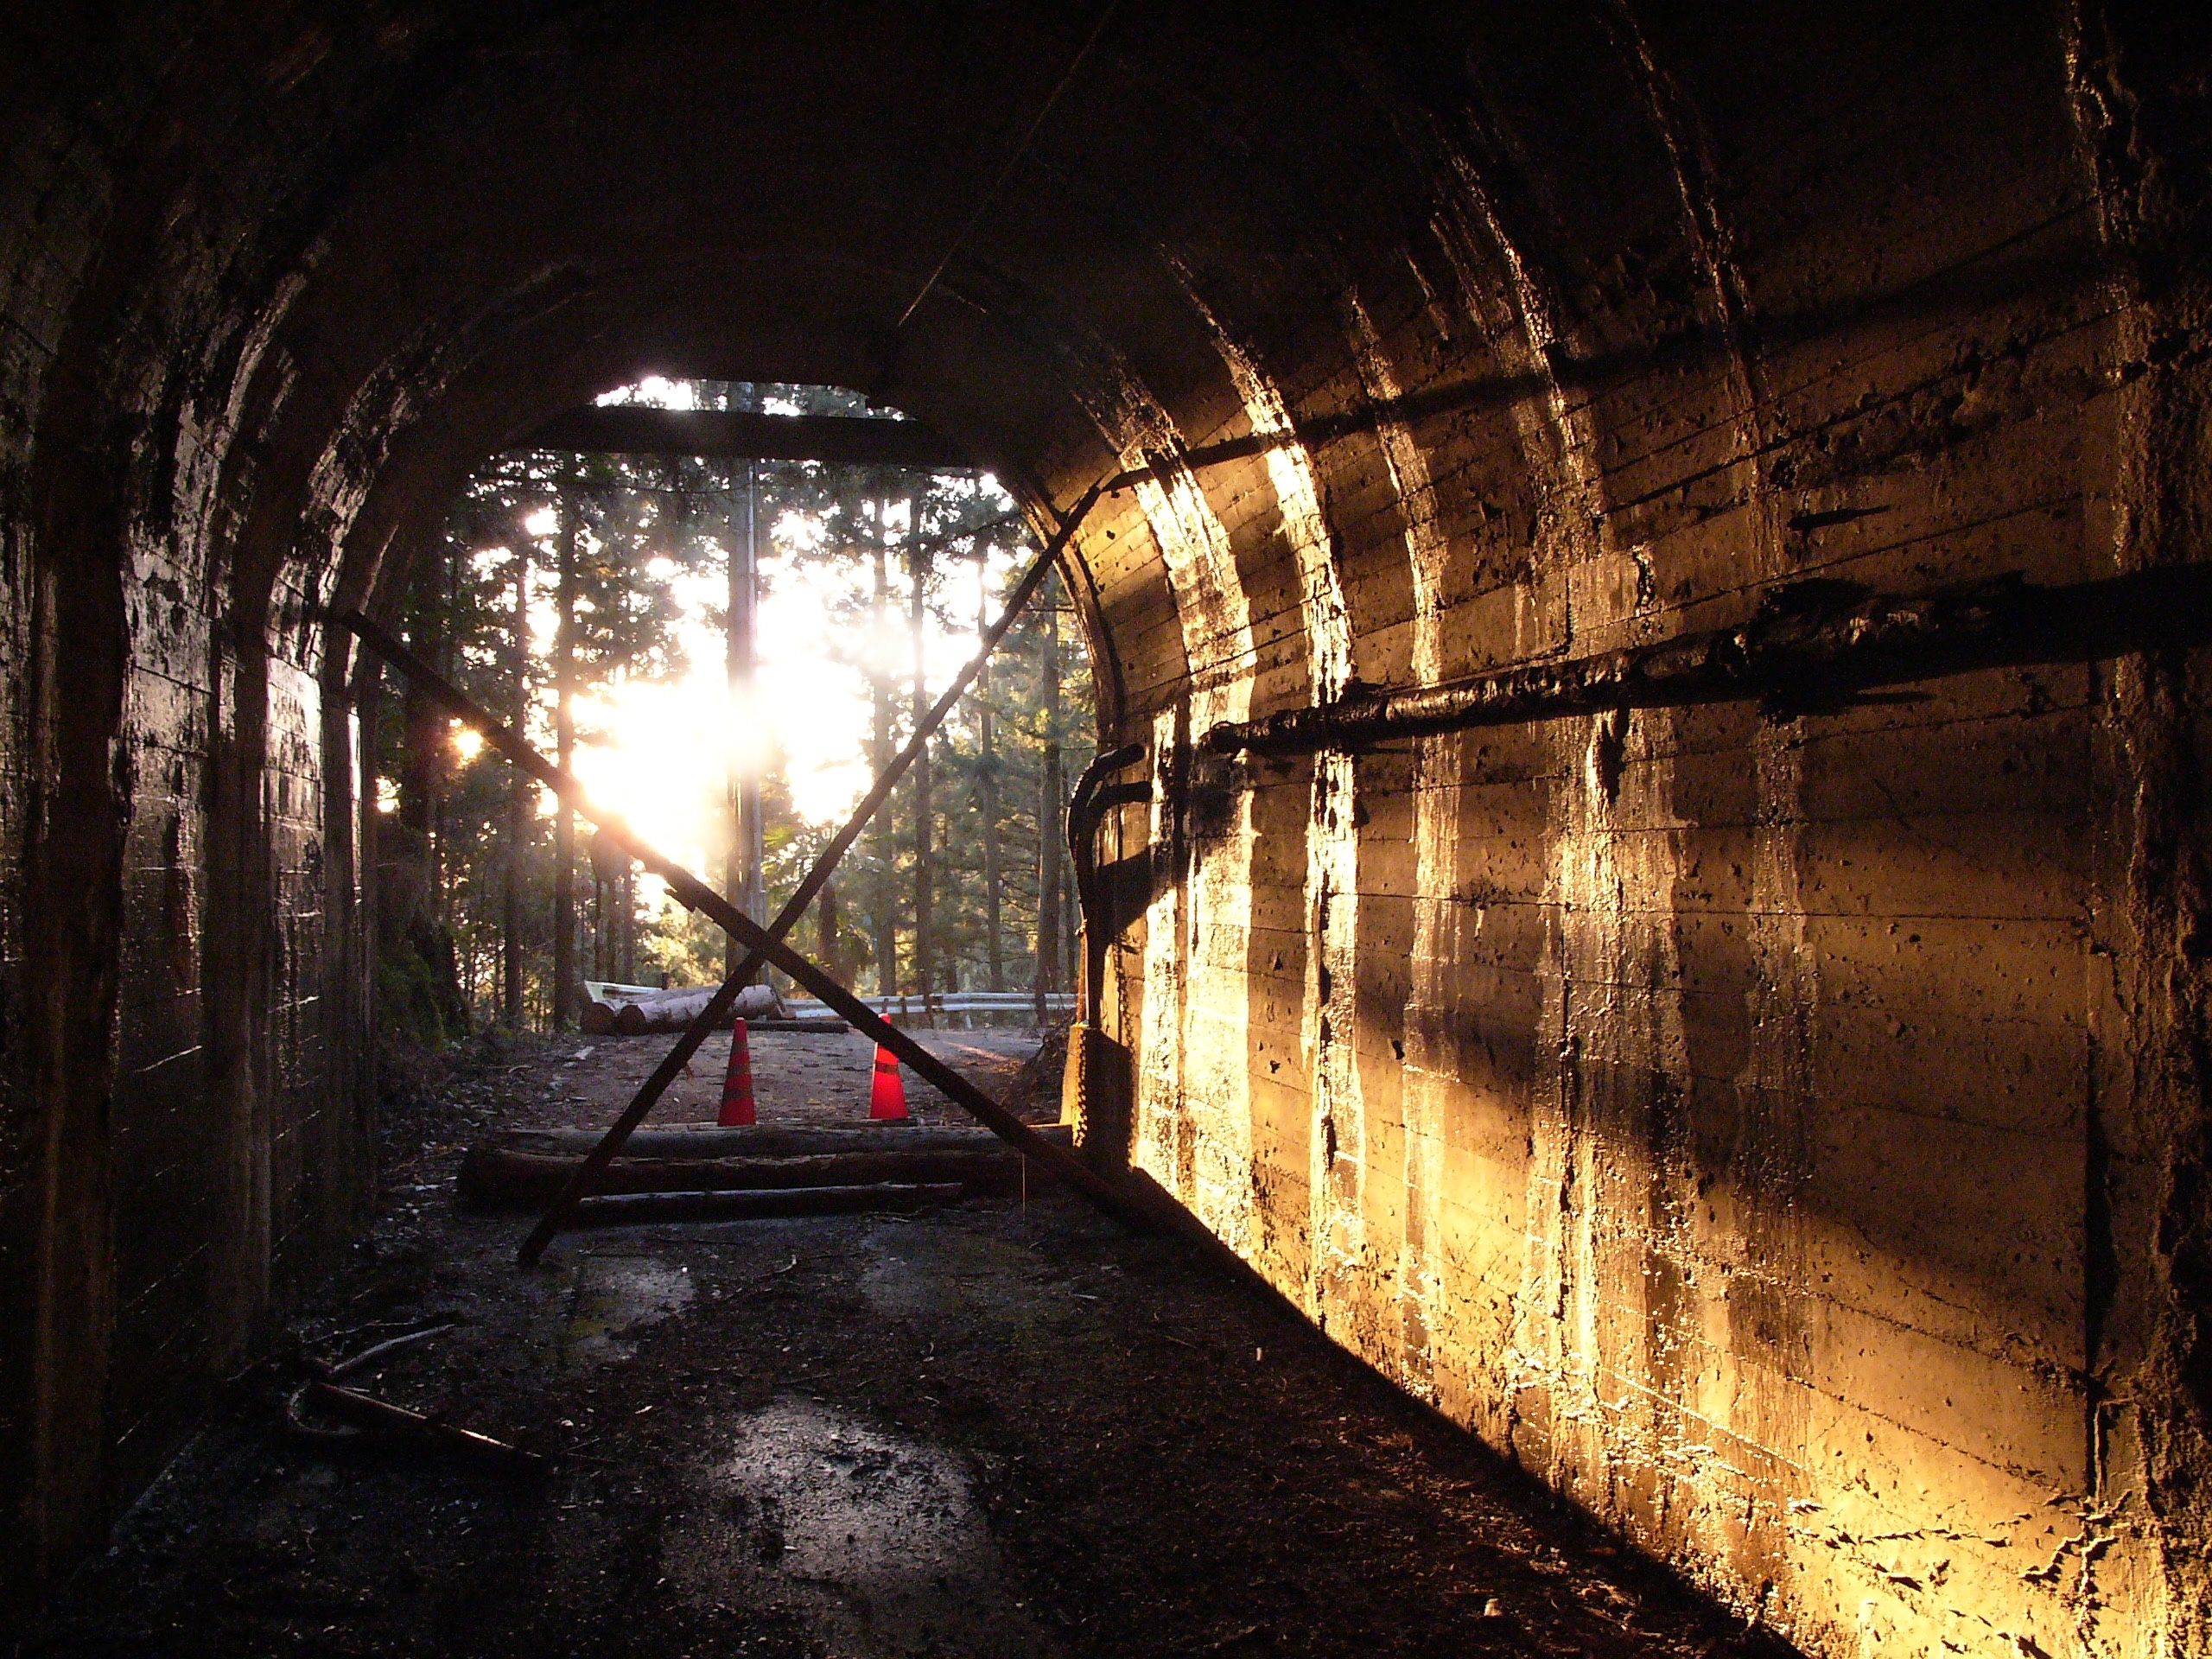 Two timbers form an X in the mouth of a tunnel, with the sun setting in the forest beyond it.